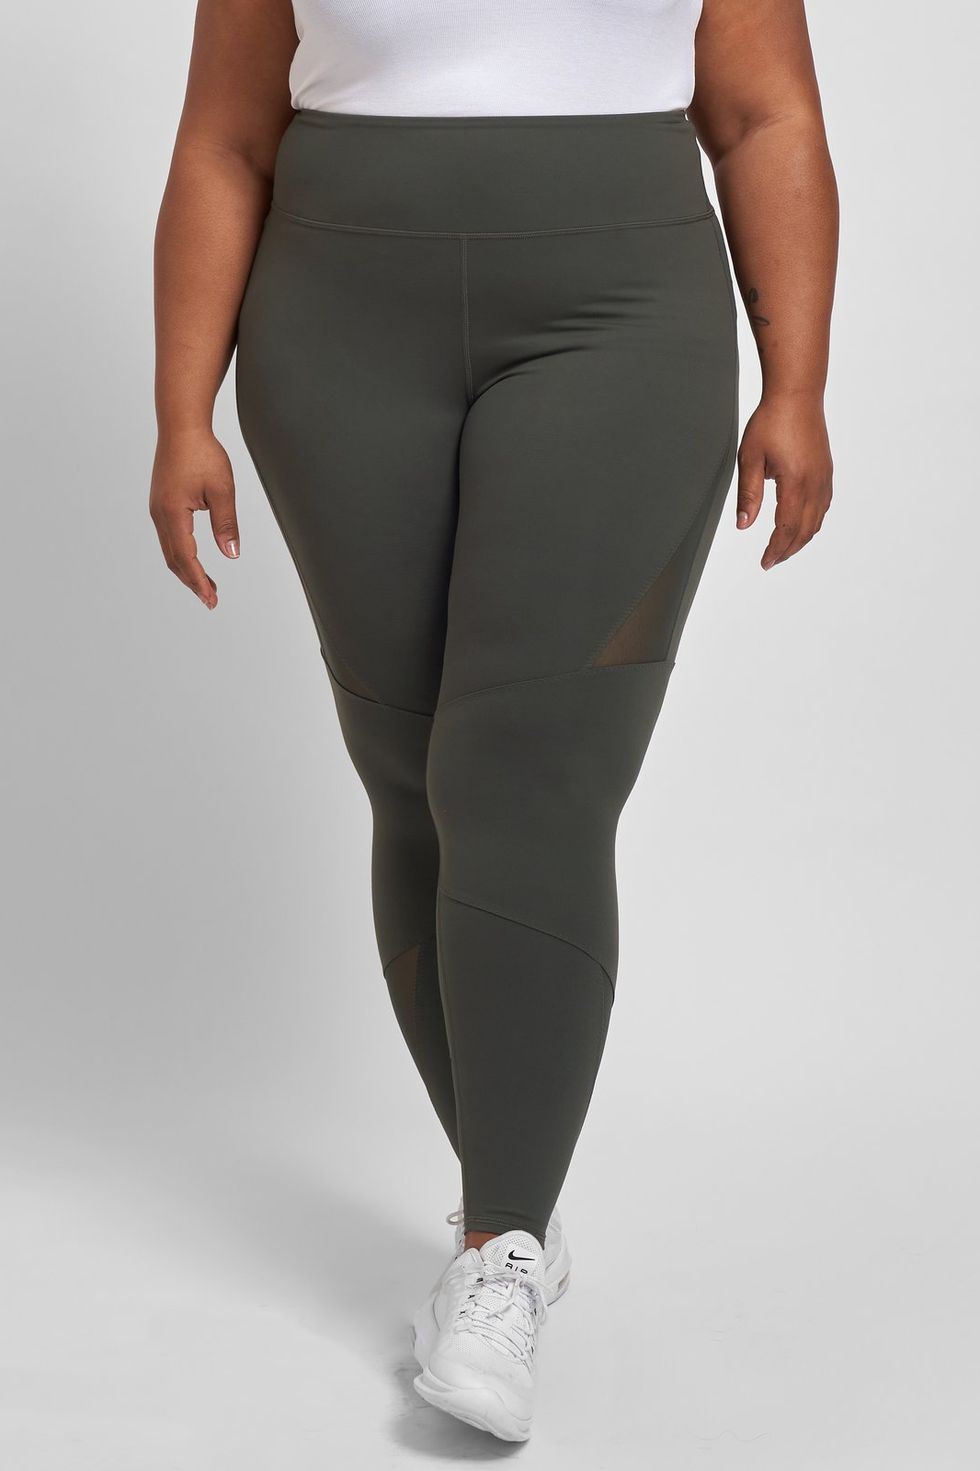 Leggings for Women Plus Size High Waisted Thick XL Turkey